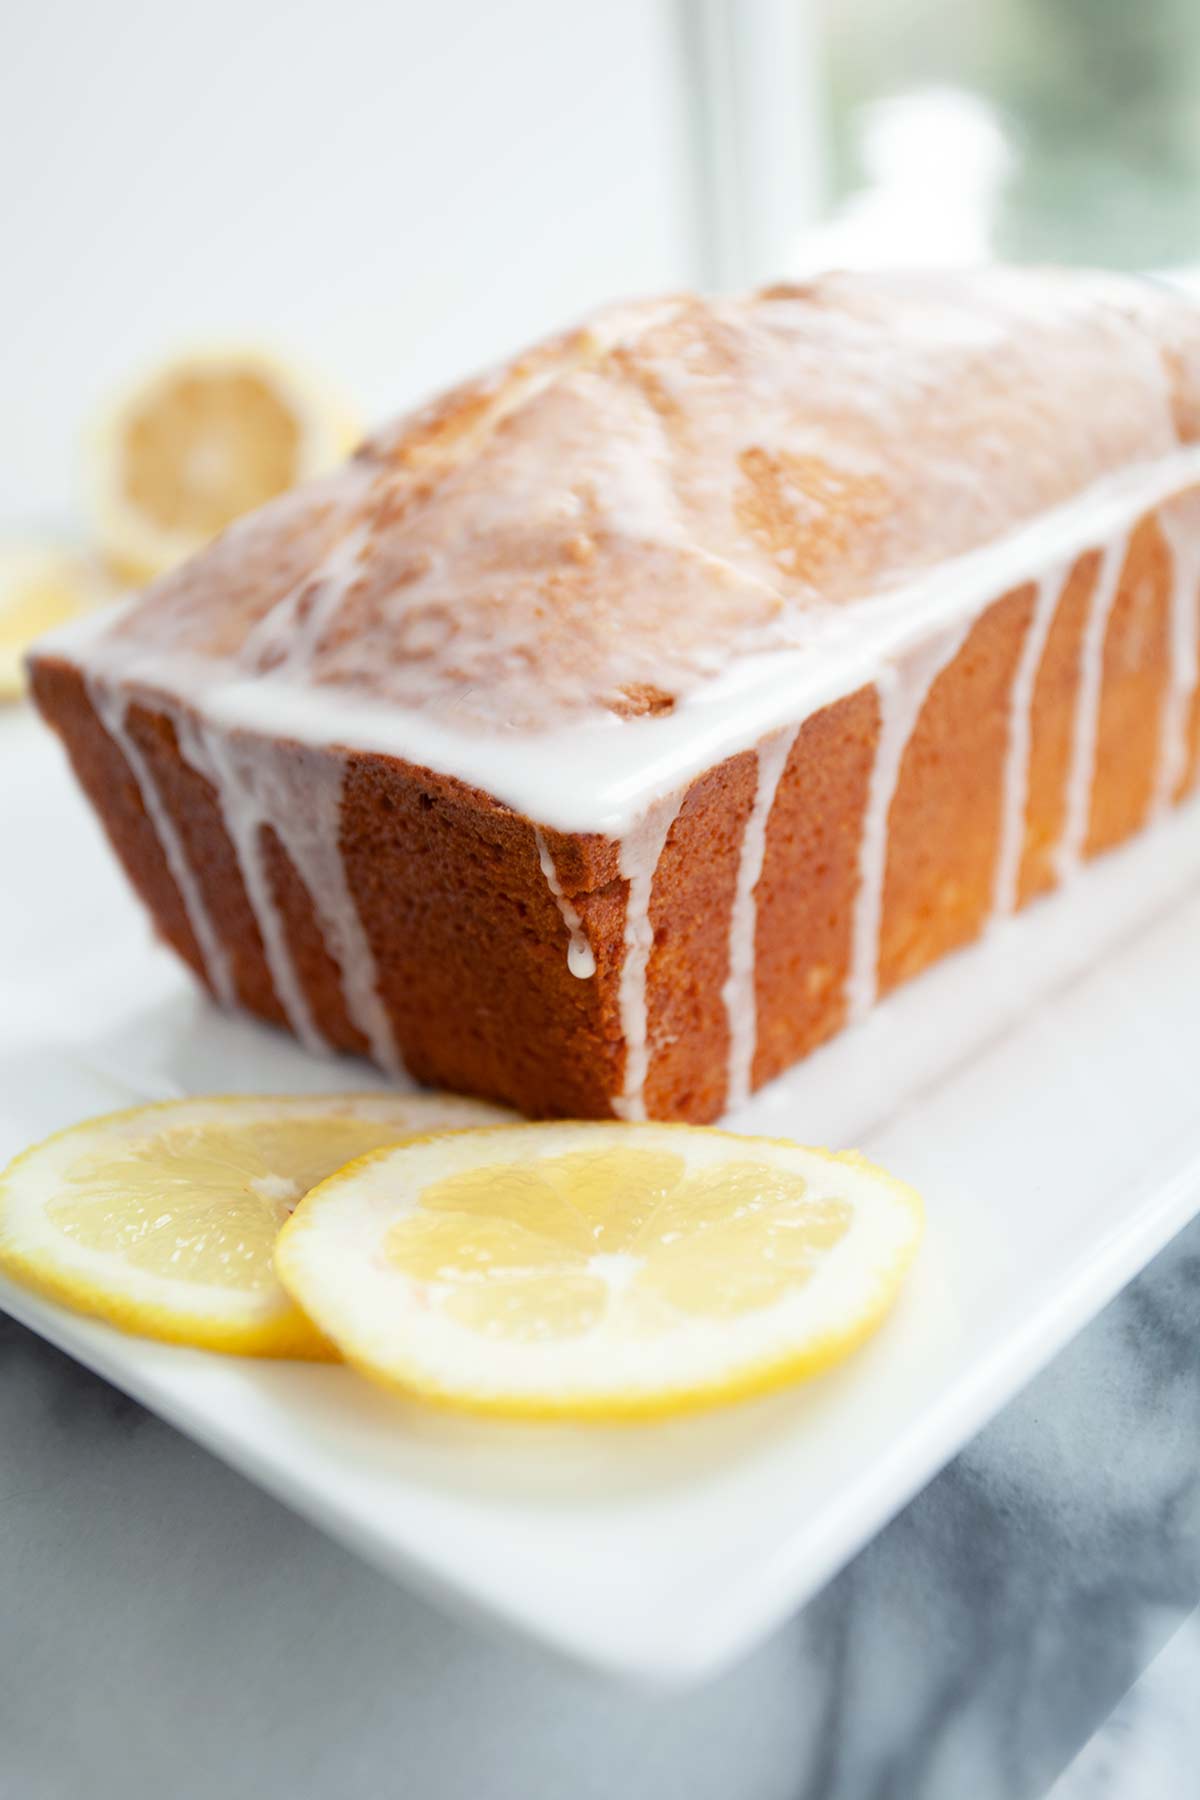 A partially sliced loaf of cream cheese pound cake with lemon glaze.